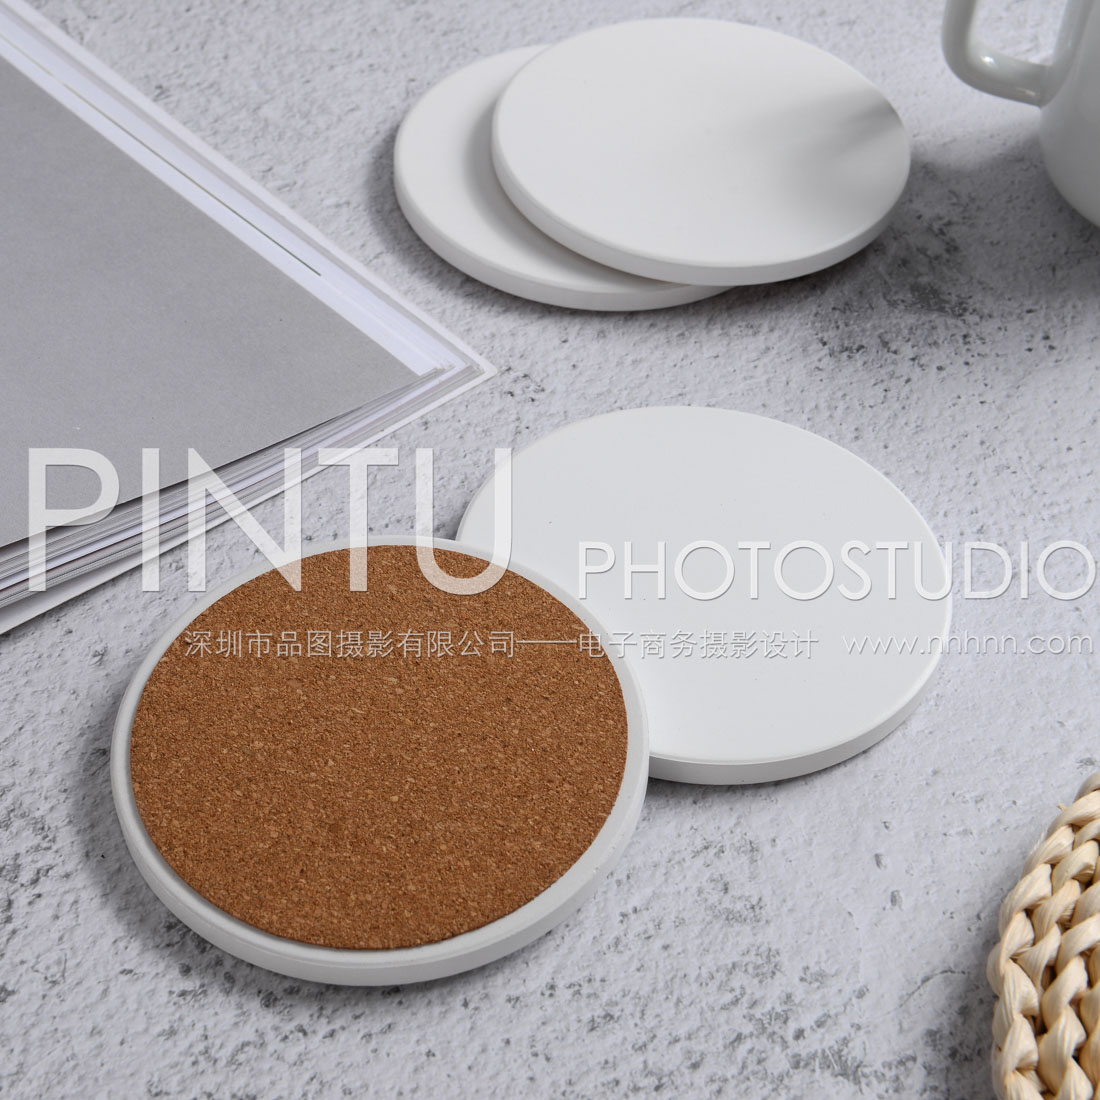 The best product photography in China Lifestyle cup cushion